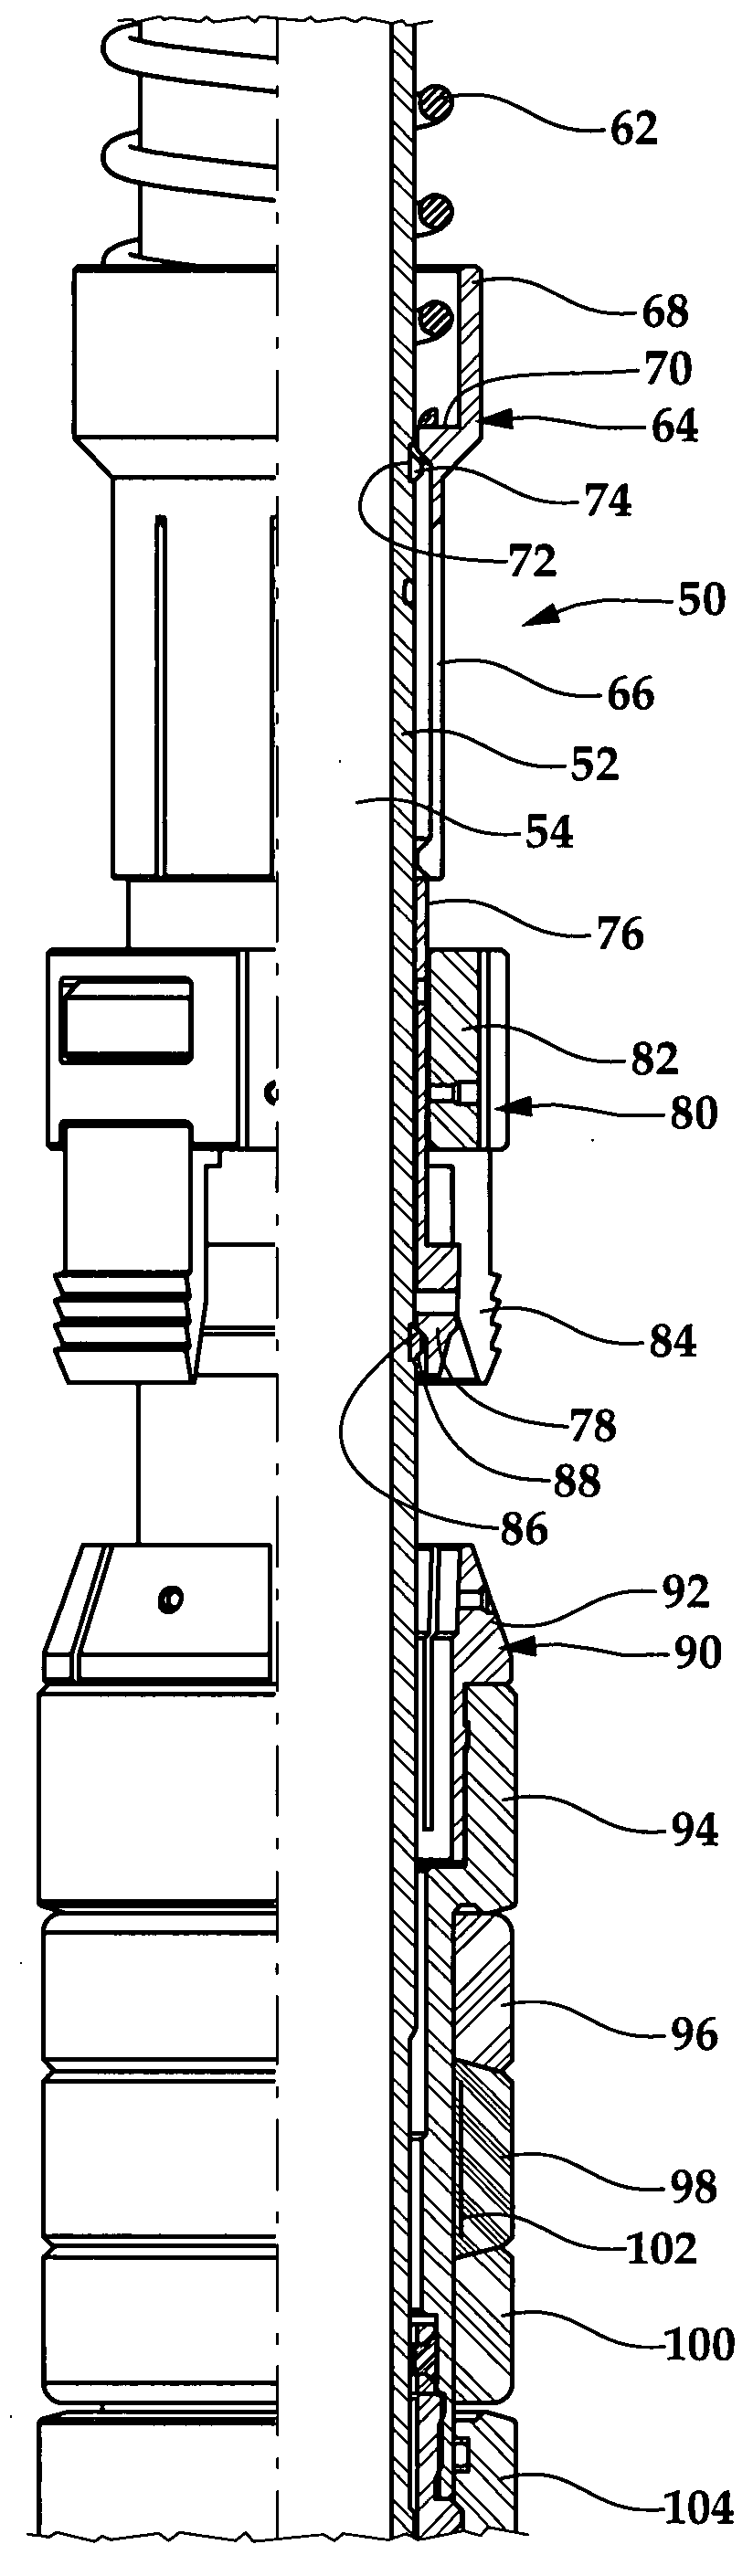 Downhole seal assembly having embedded sensors and method for use of same